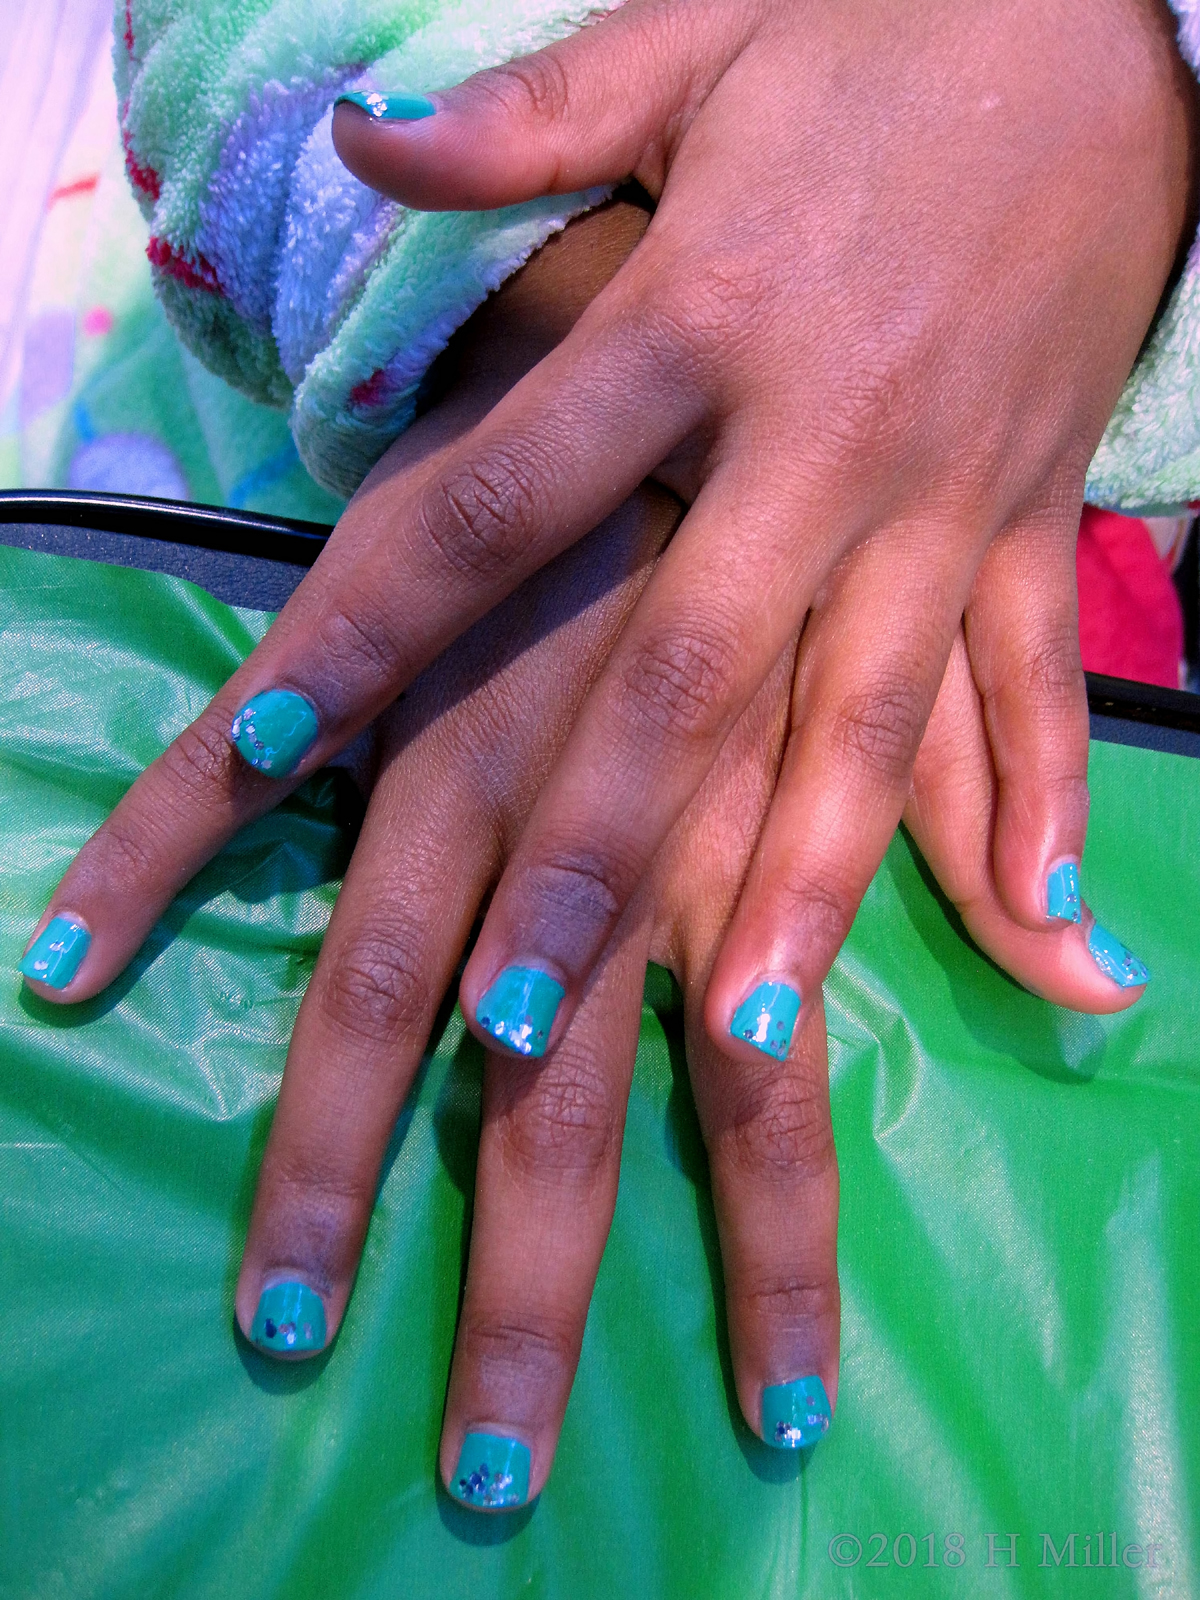 Teal Base Kids Manicure With Fun Glitter Overlay